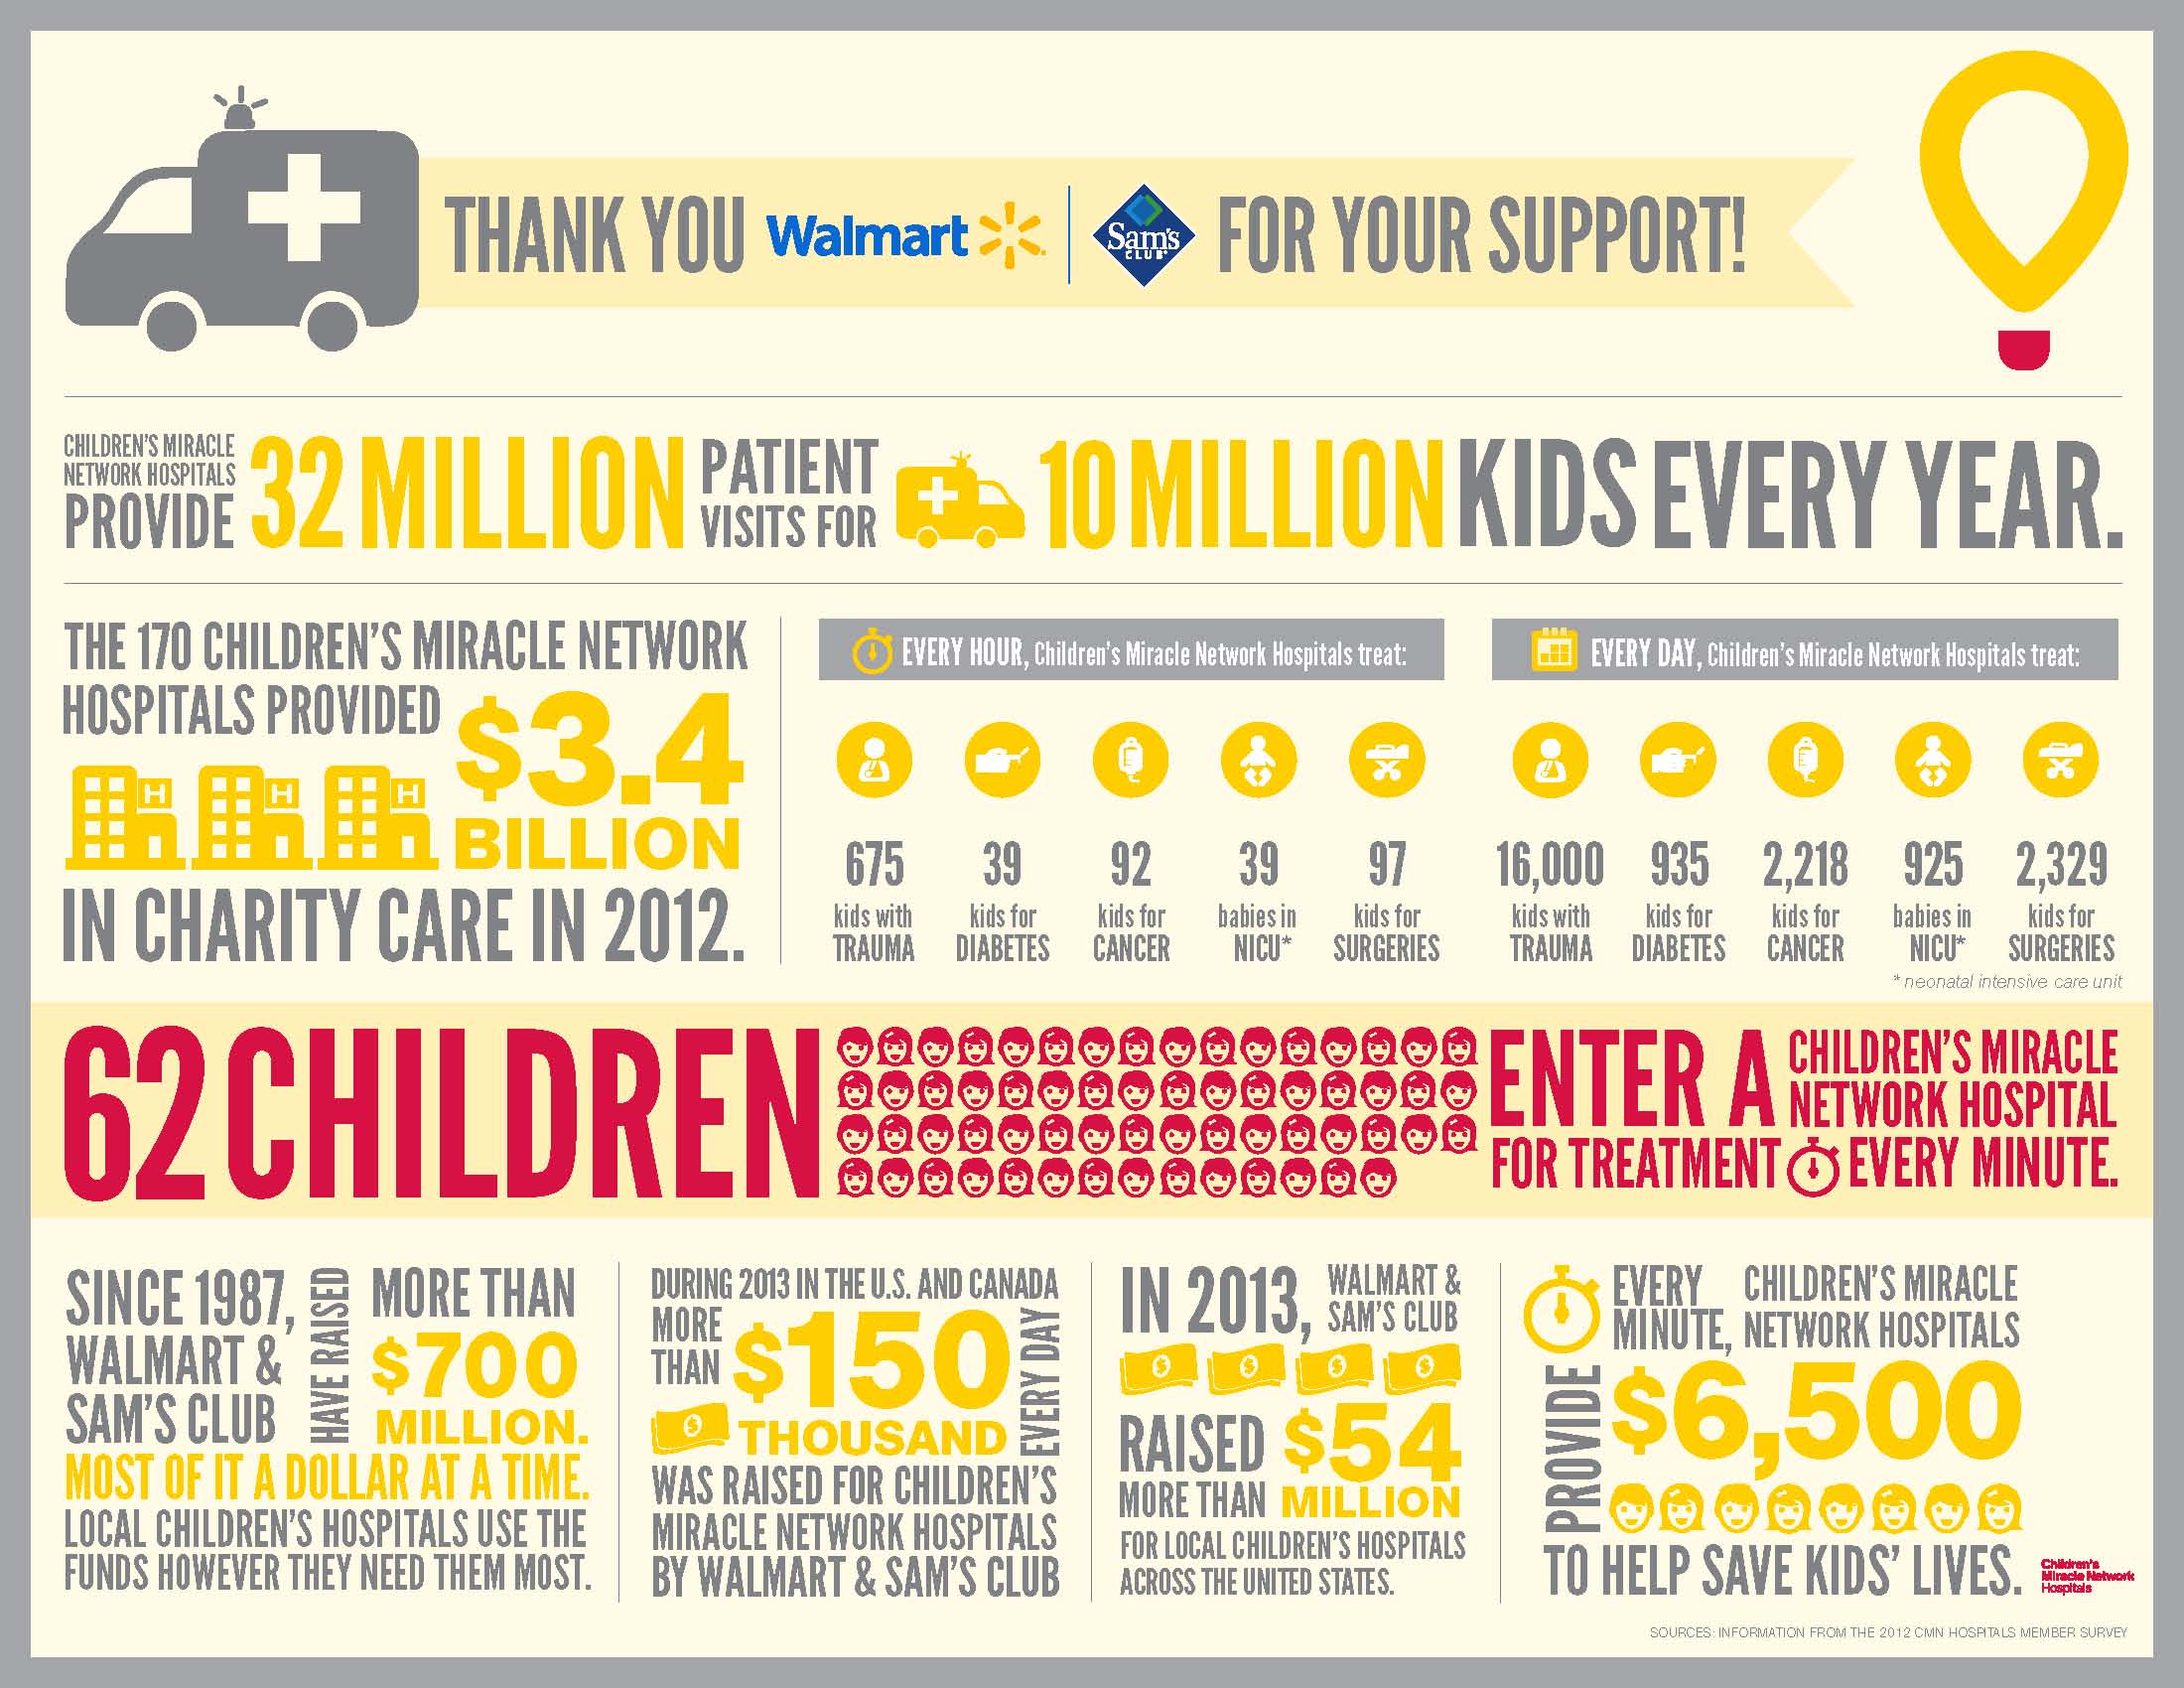 Infogrpahic showing the impact Children's Miracle Network Hospitals have on local communities thanks to support from Walmart and Sam's Club